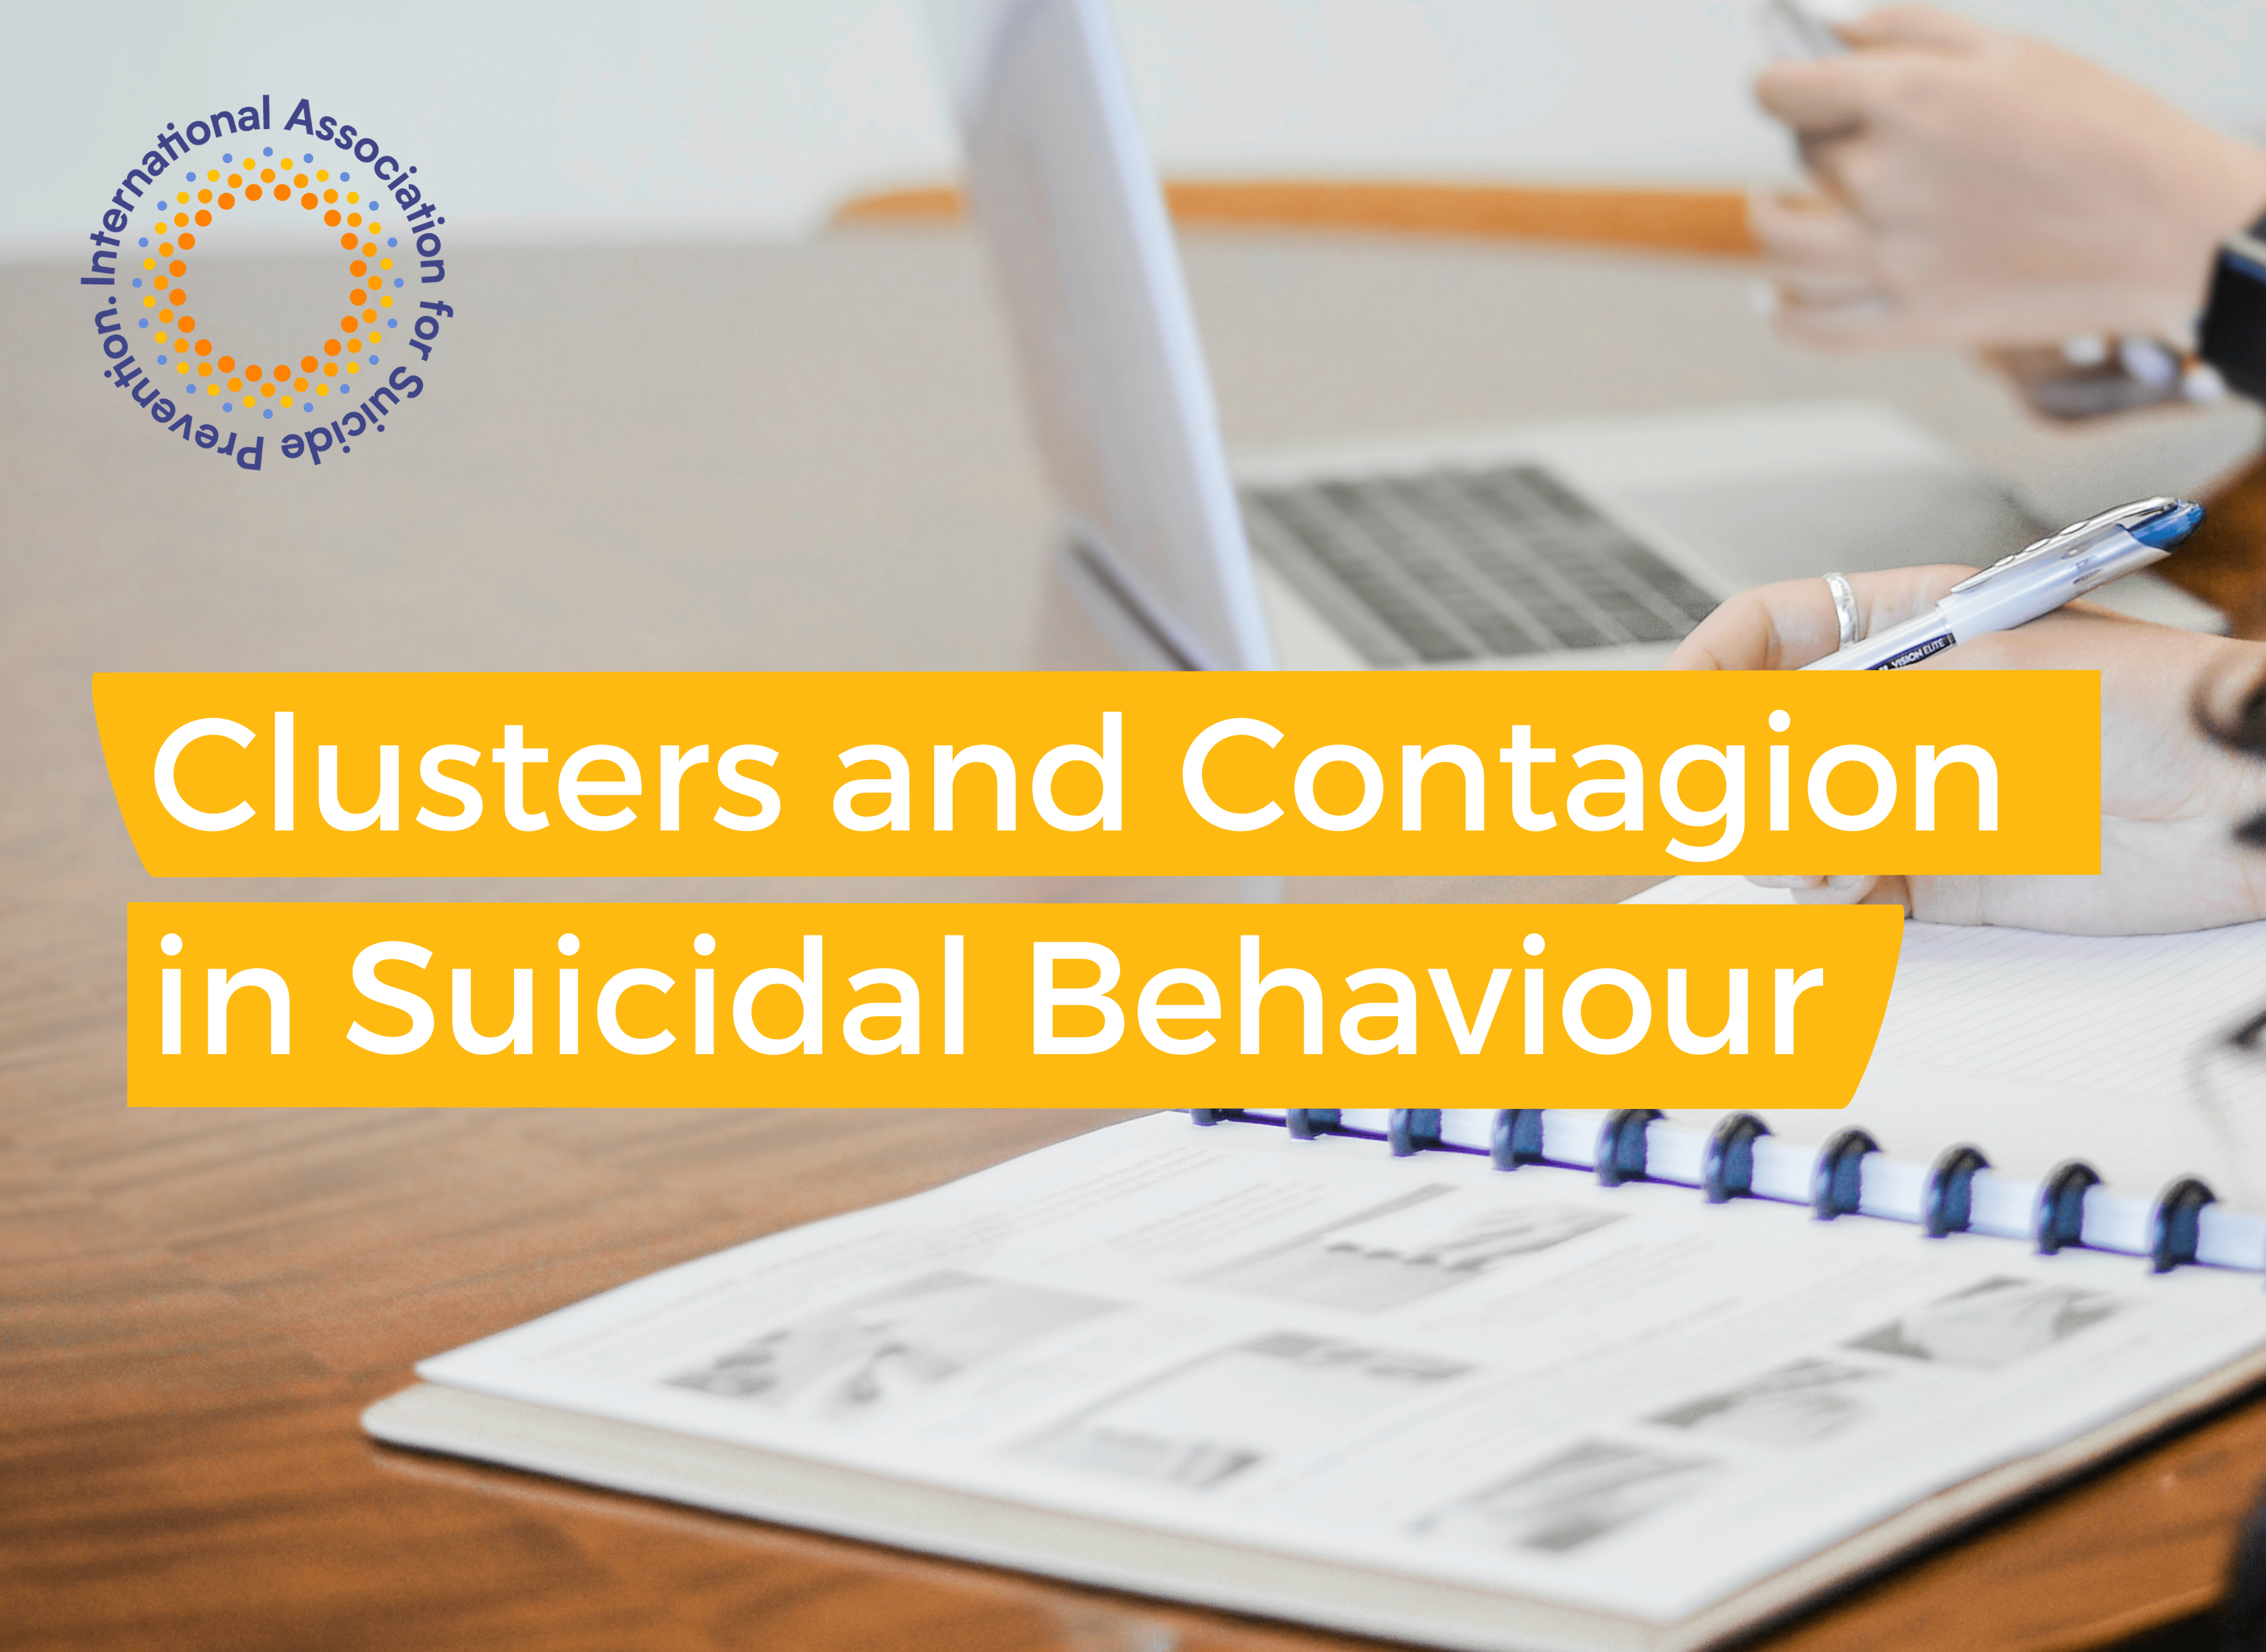 Clusters and Contagion in Suicidal Behaviour